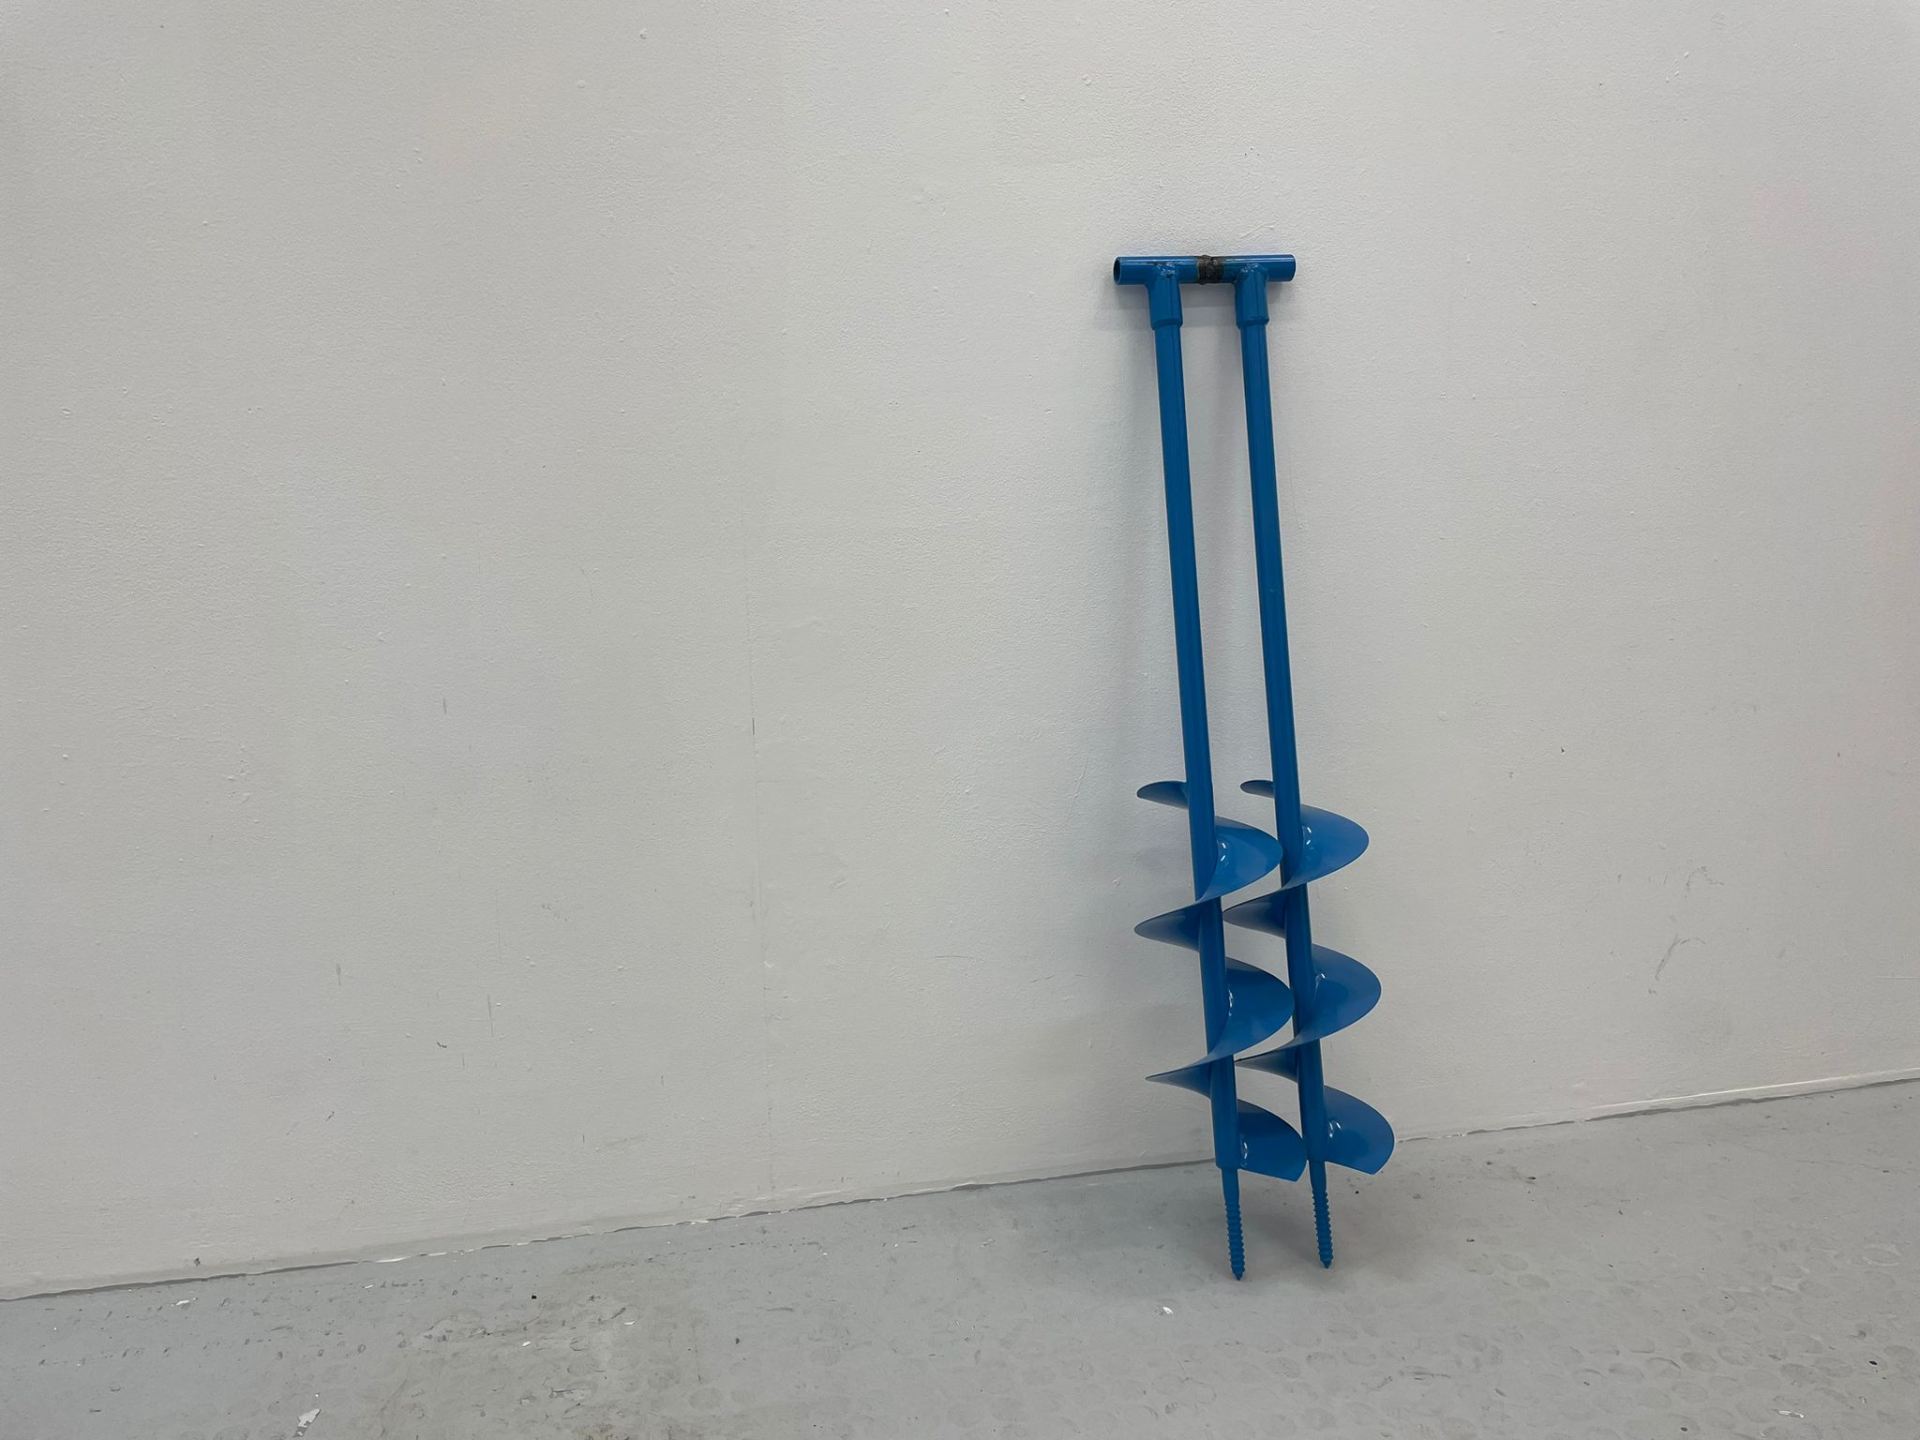 An image of two blue Augers welded together and standing side by side.